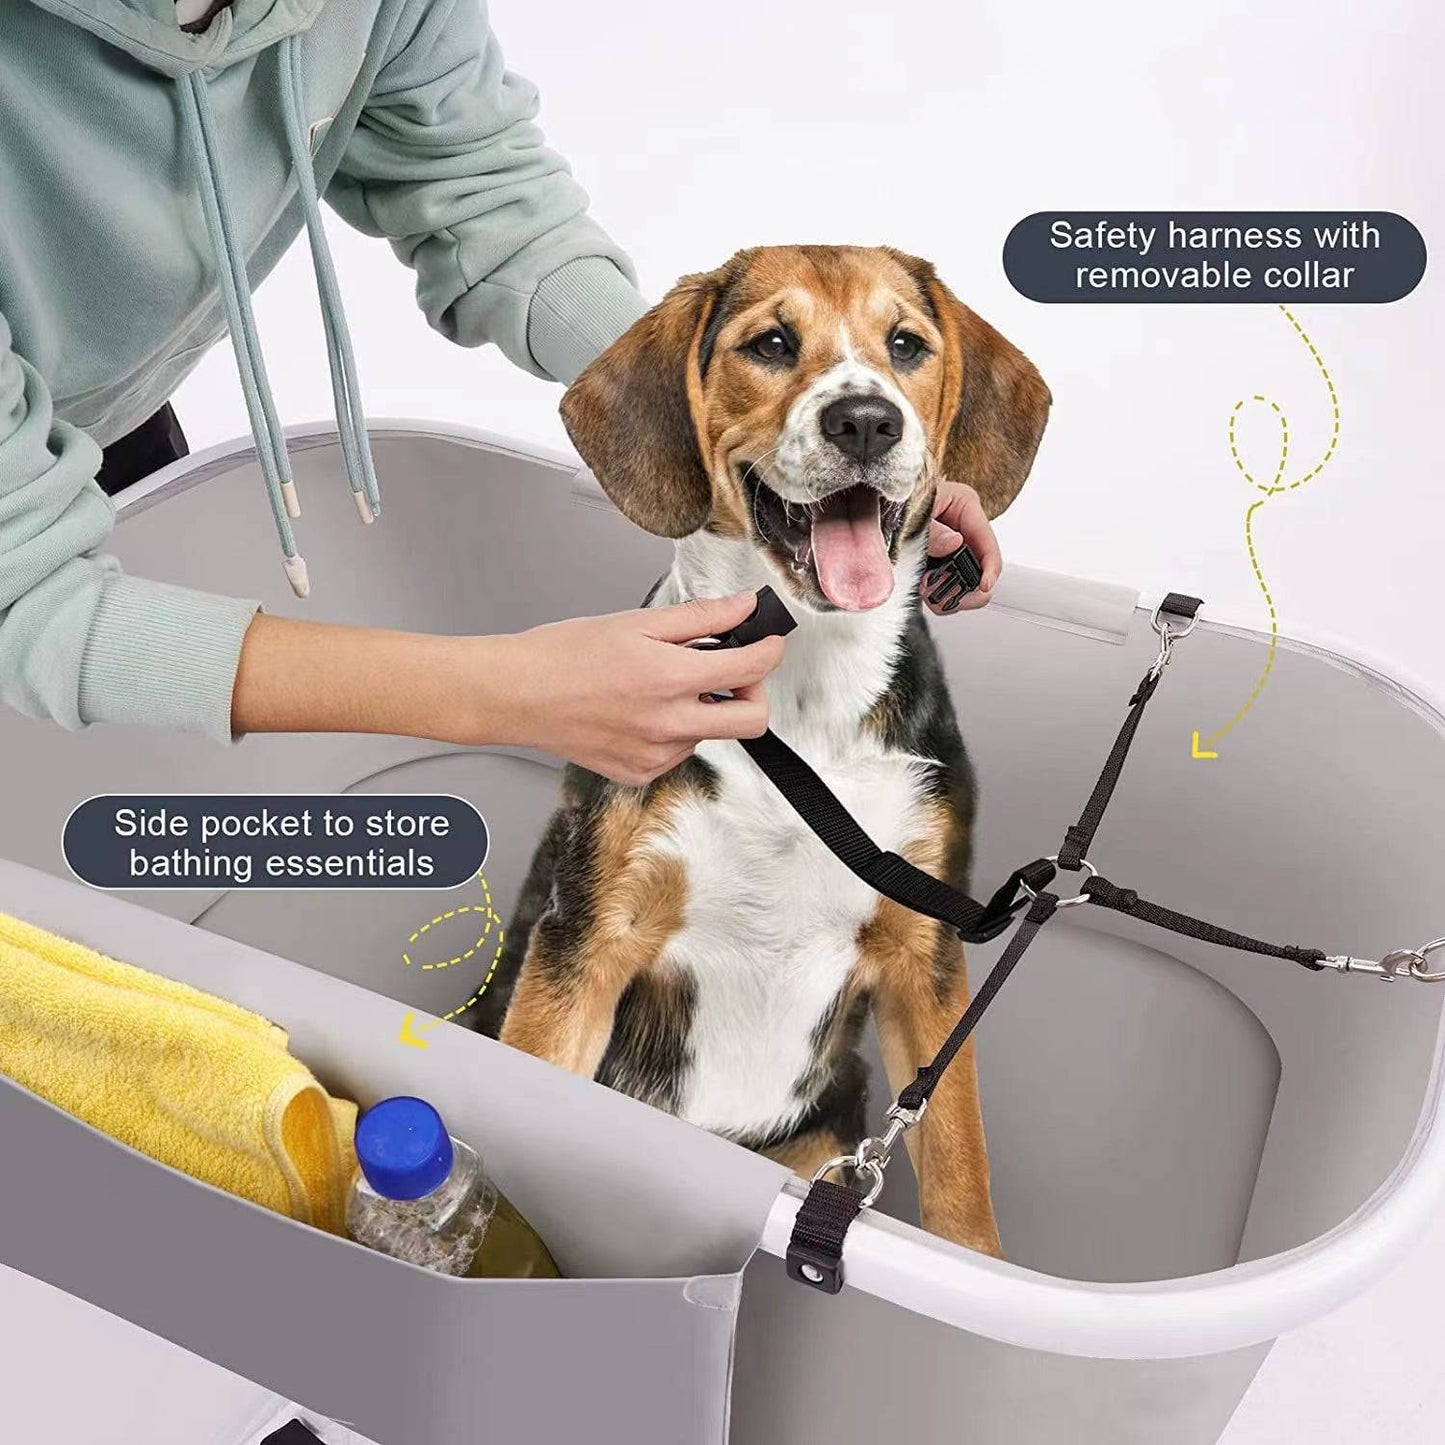 COOLBABY Elevated Dog Bath - 5 Height Adjustable Foldable And Portable Dog Washing Stations - COOLBABY